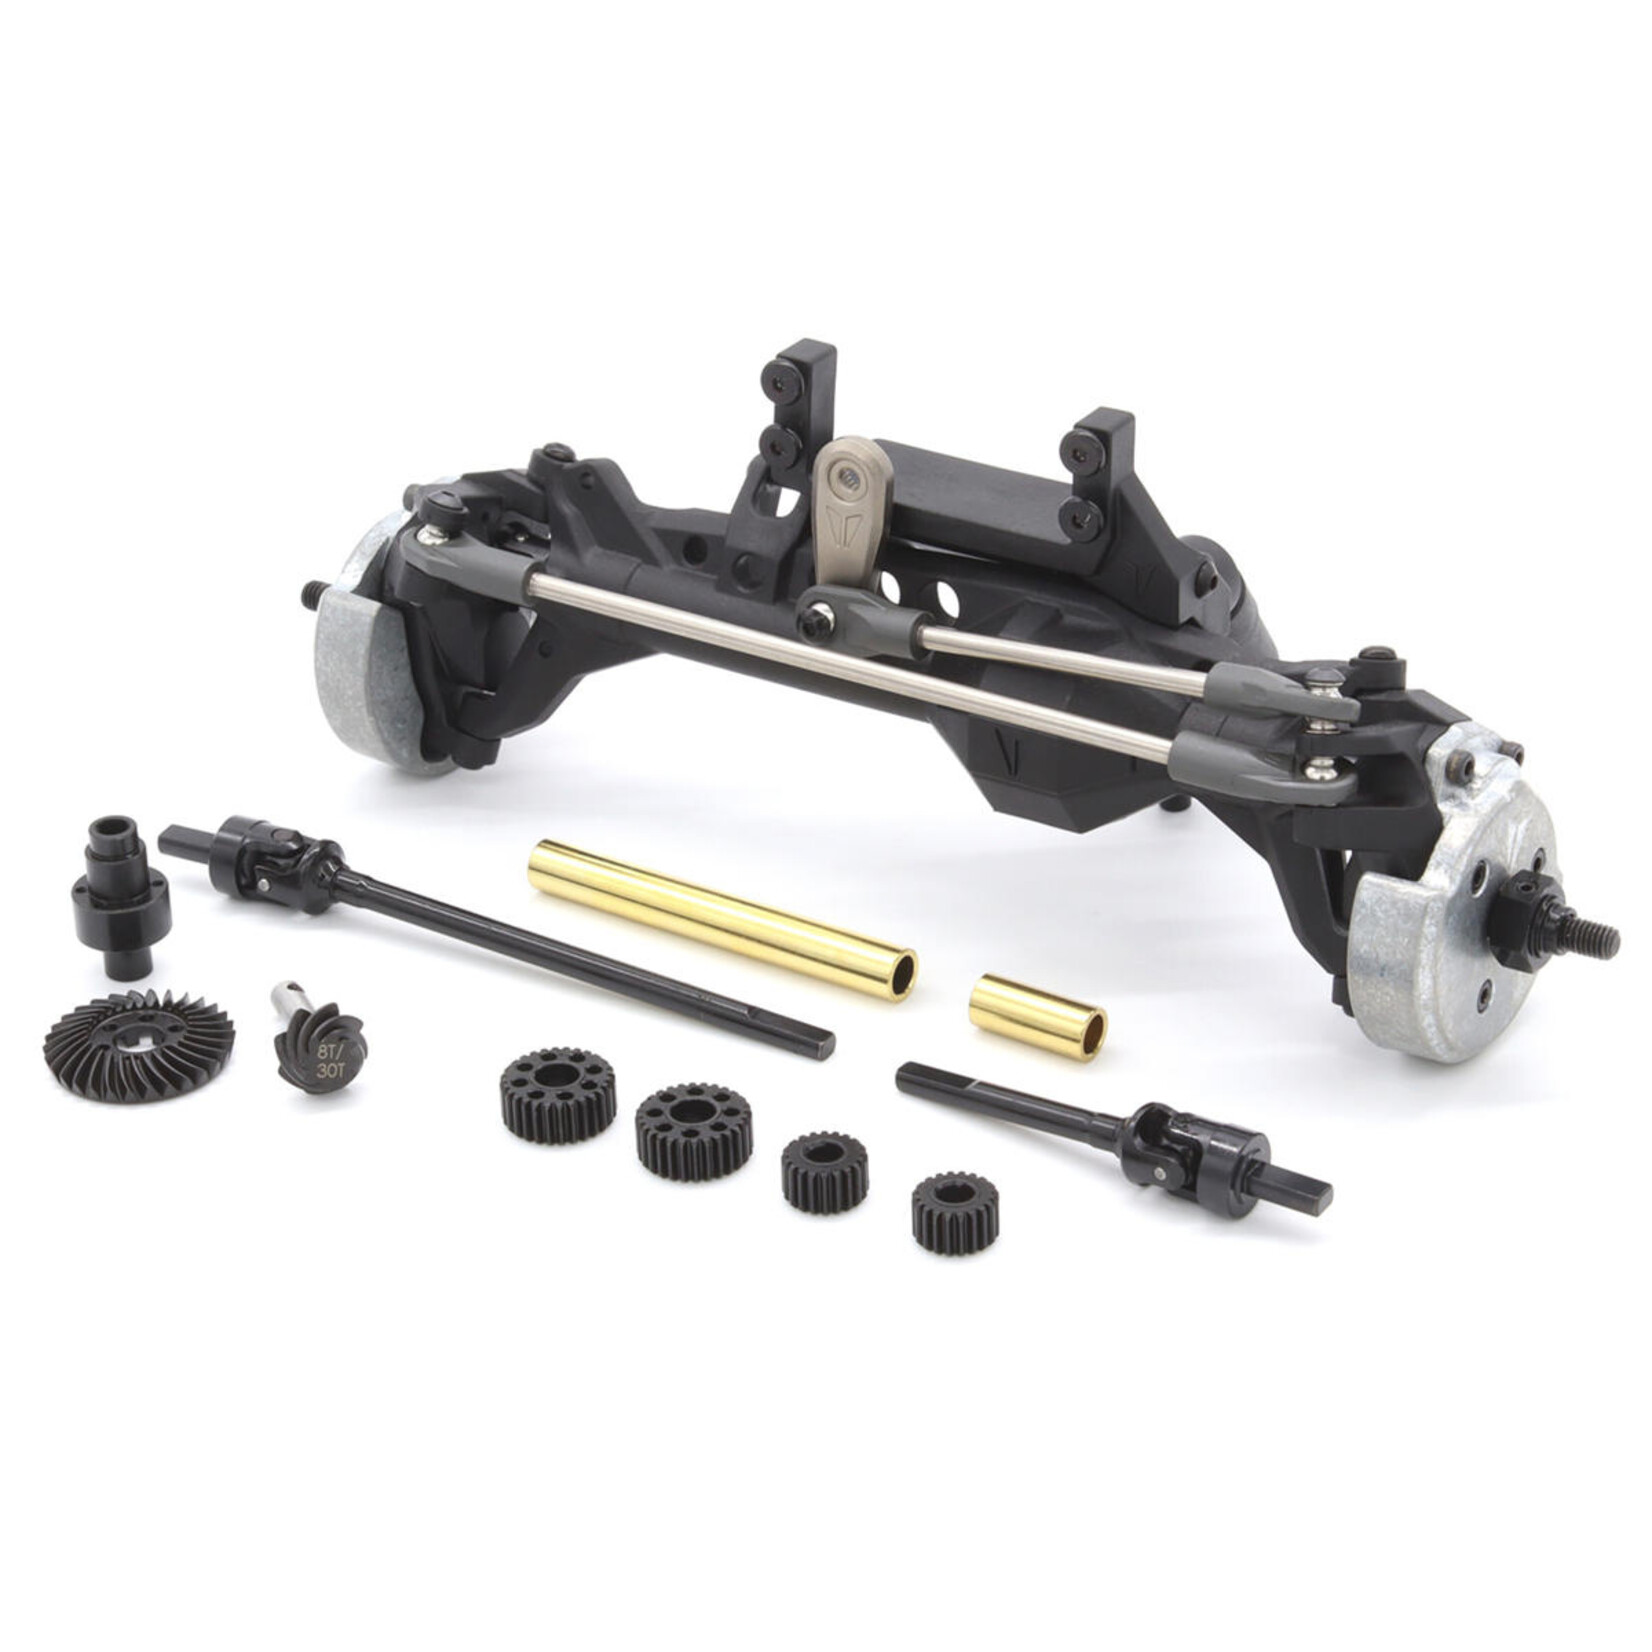 Vanquish Products Vanquish Products VRD Carbon 1/10 Competition Rock Crawler Kit #VPS09015